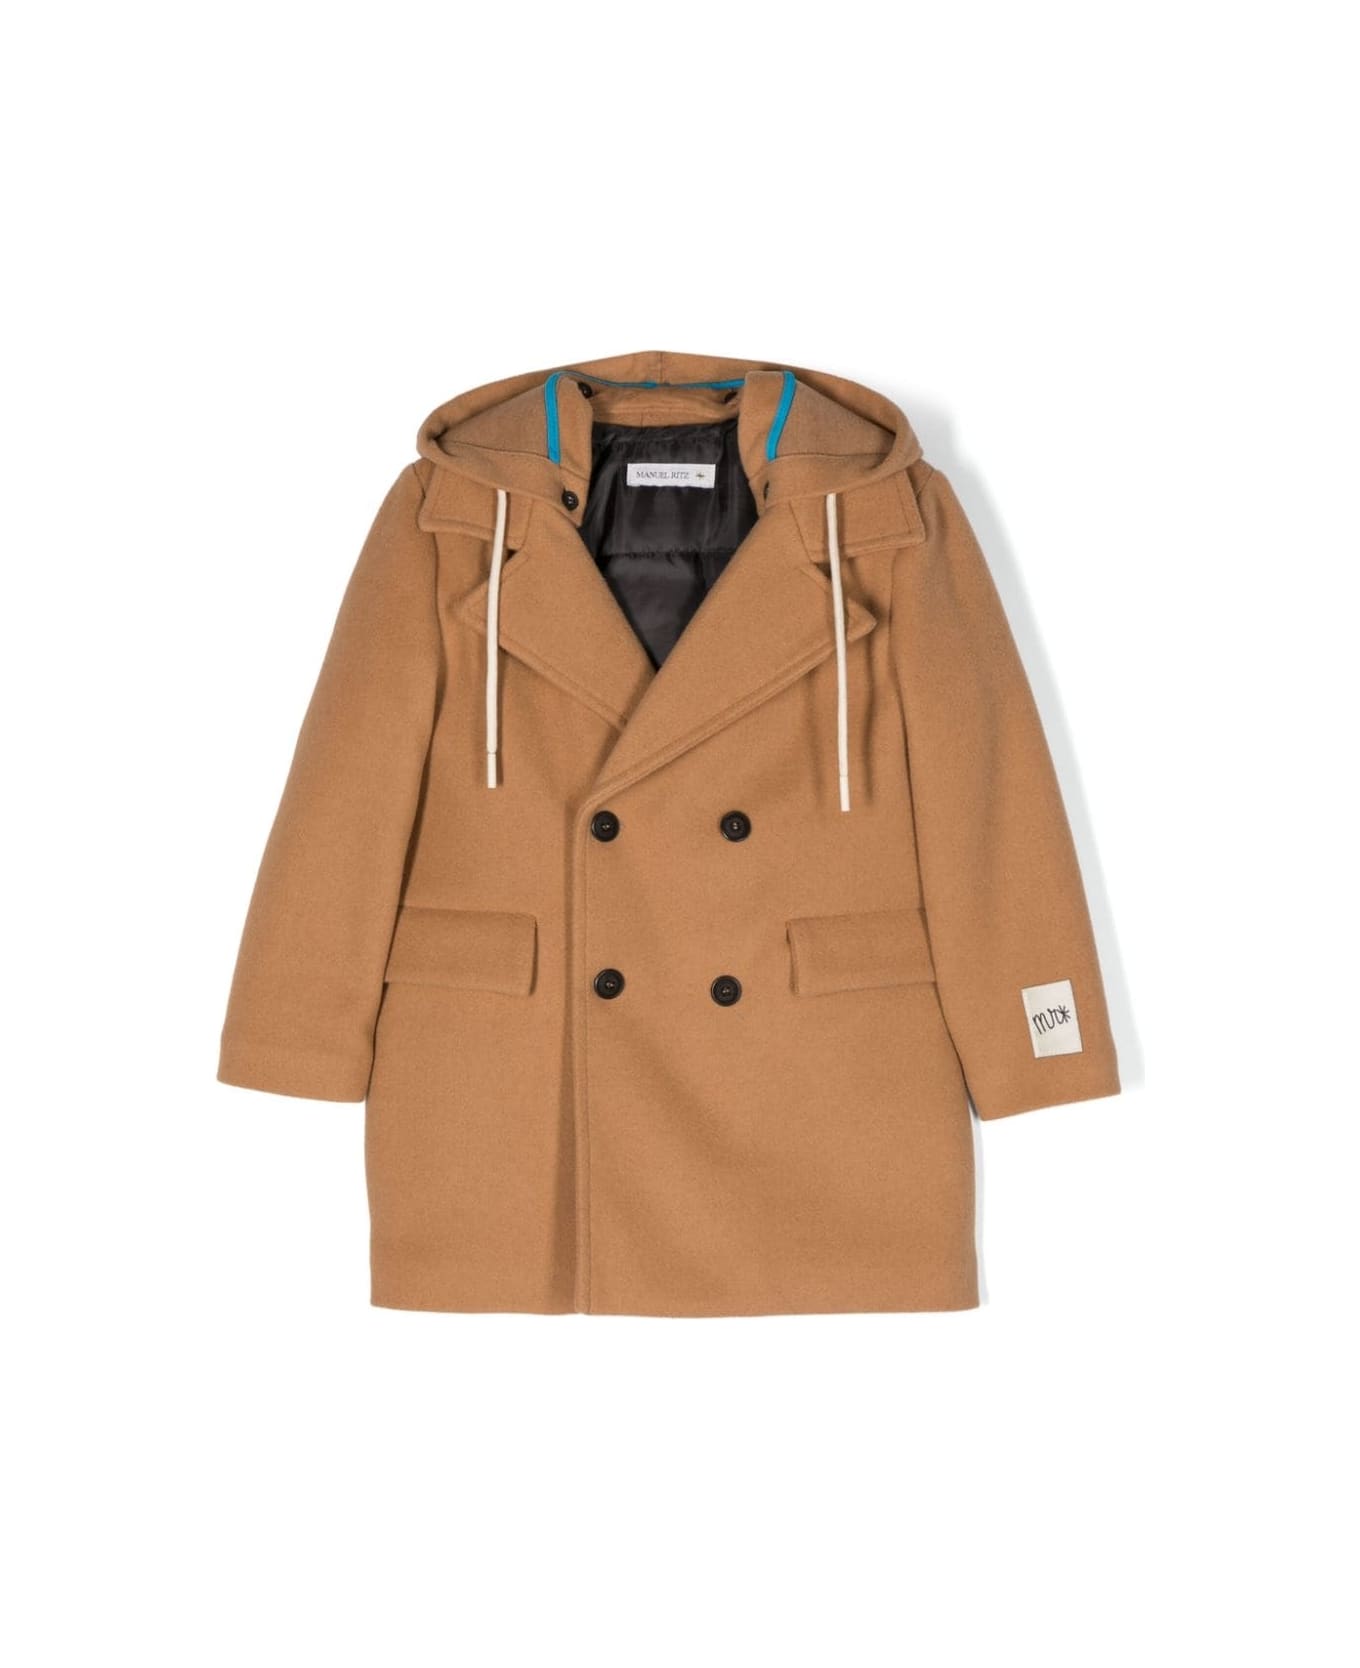 Manuel Ritz Double-breasted Coat With Removable Hood - Beige